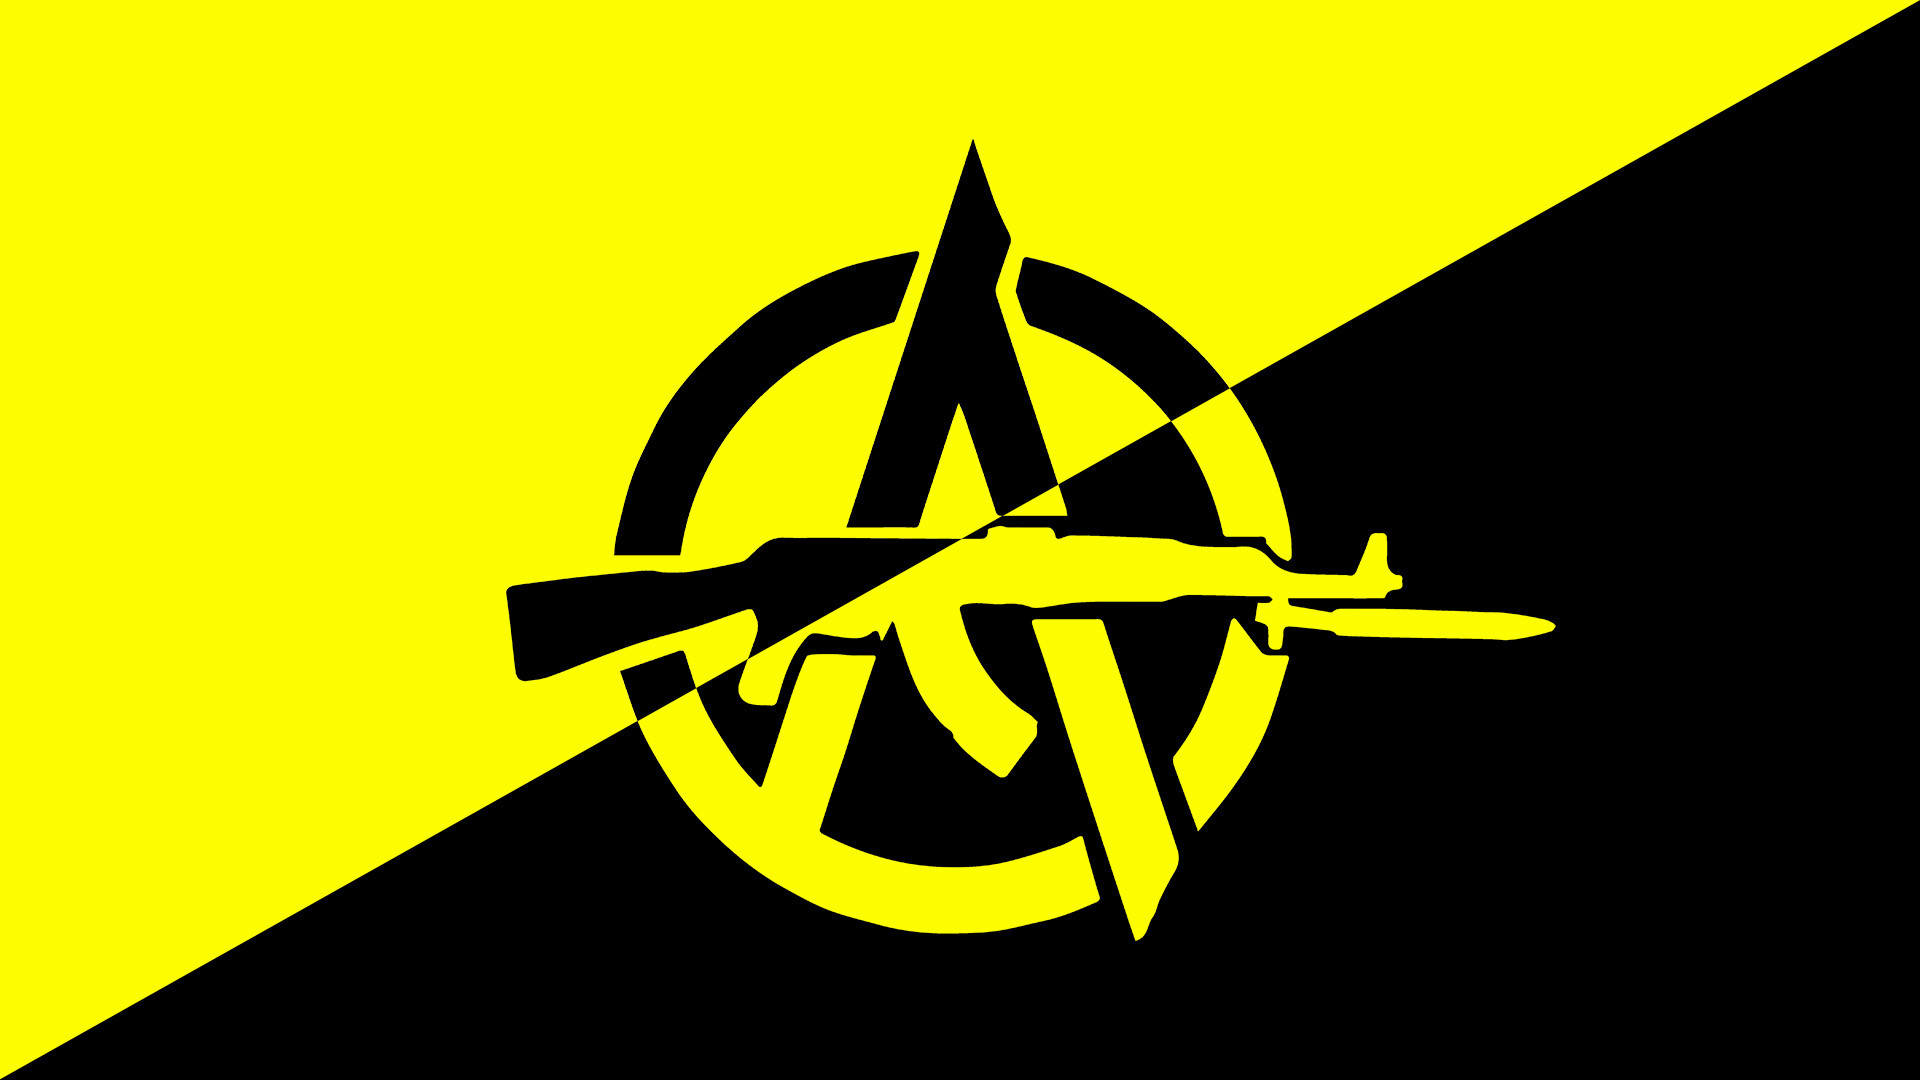 1920x1080 Anarcho-capitalism Wallpaper by Appriweb Anarcho-capitalism Wallpaper by  Appriweb